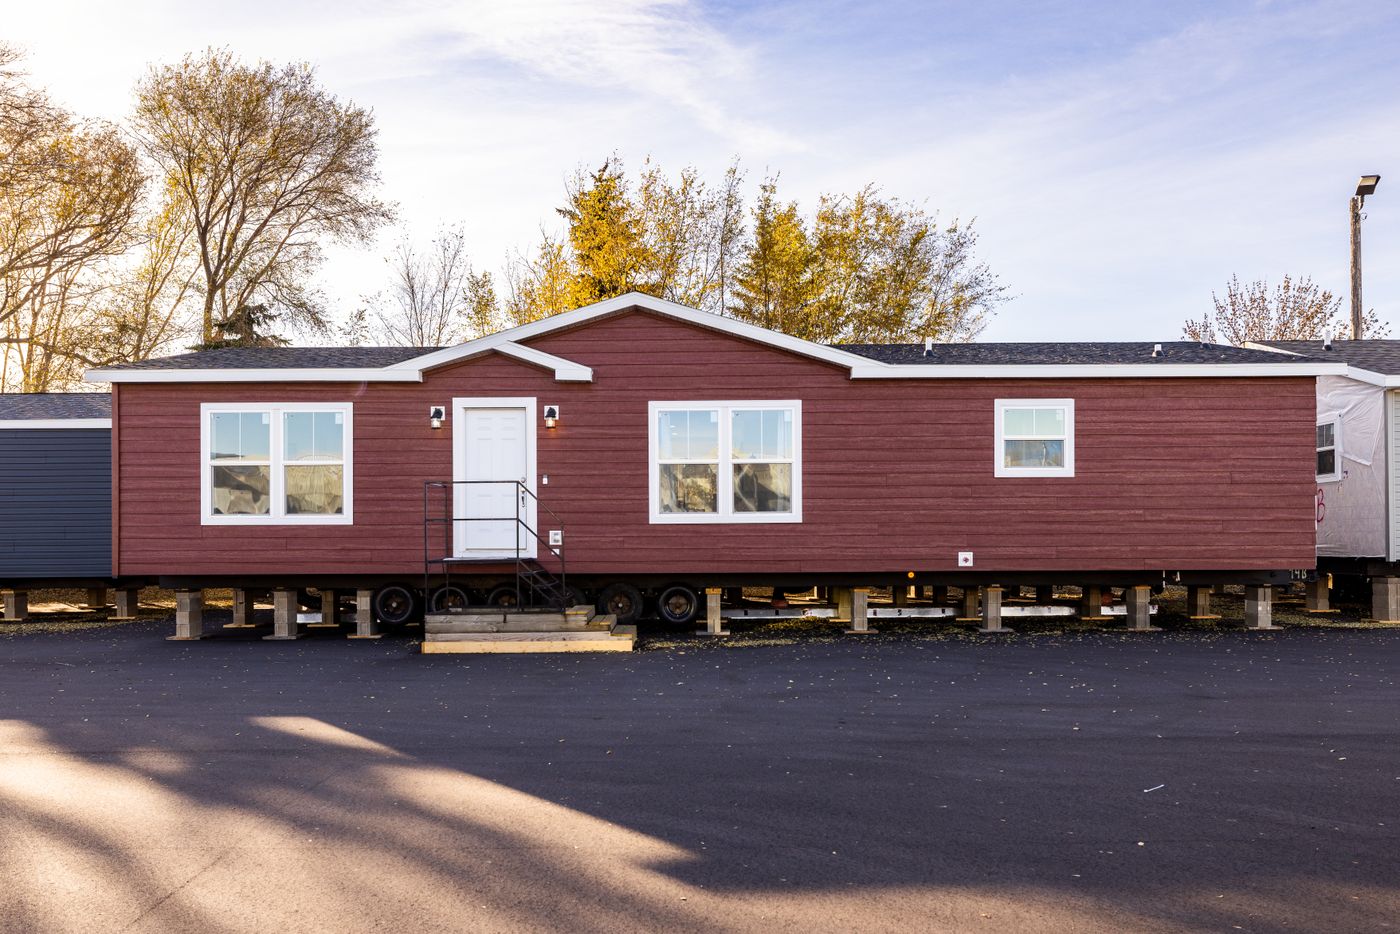 The THE WASHINGTON MOD Exterior. This Modular Home features 3 bedrooms and 2 baths.